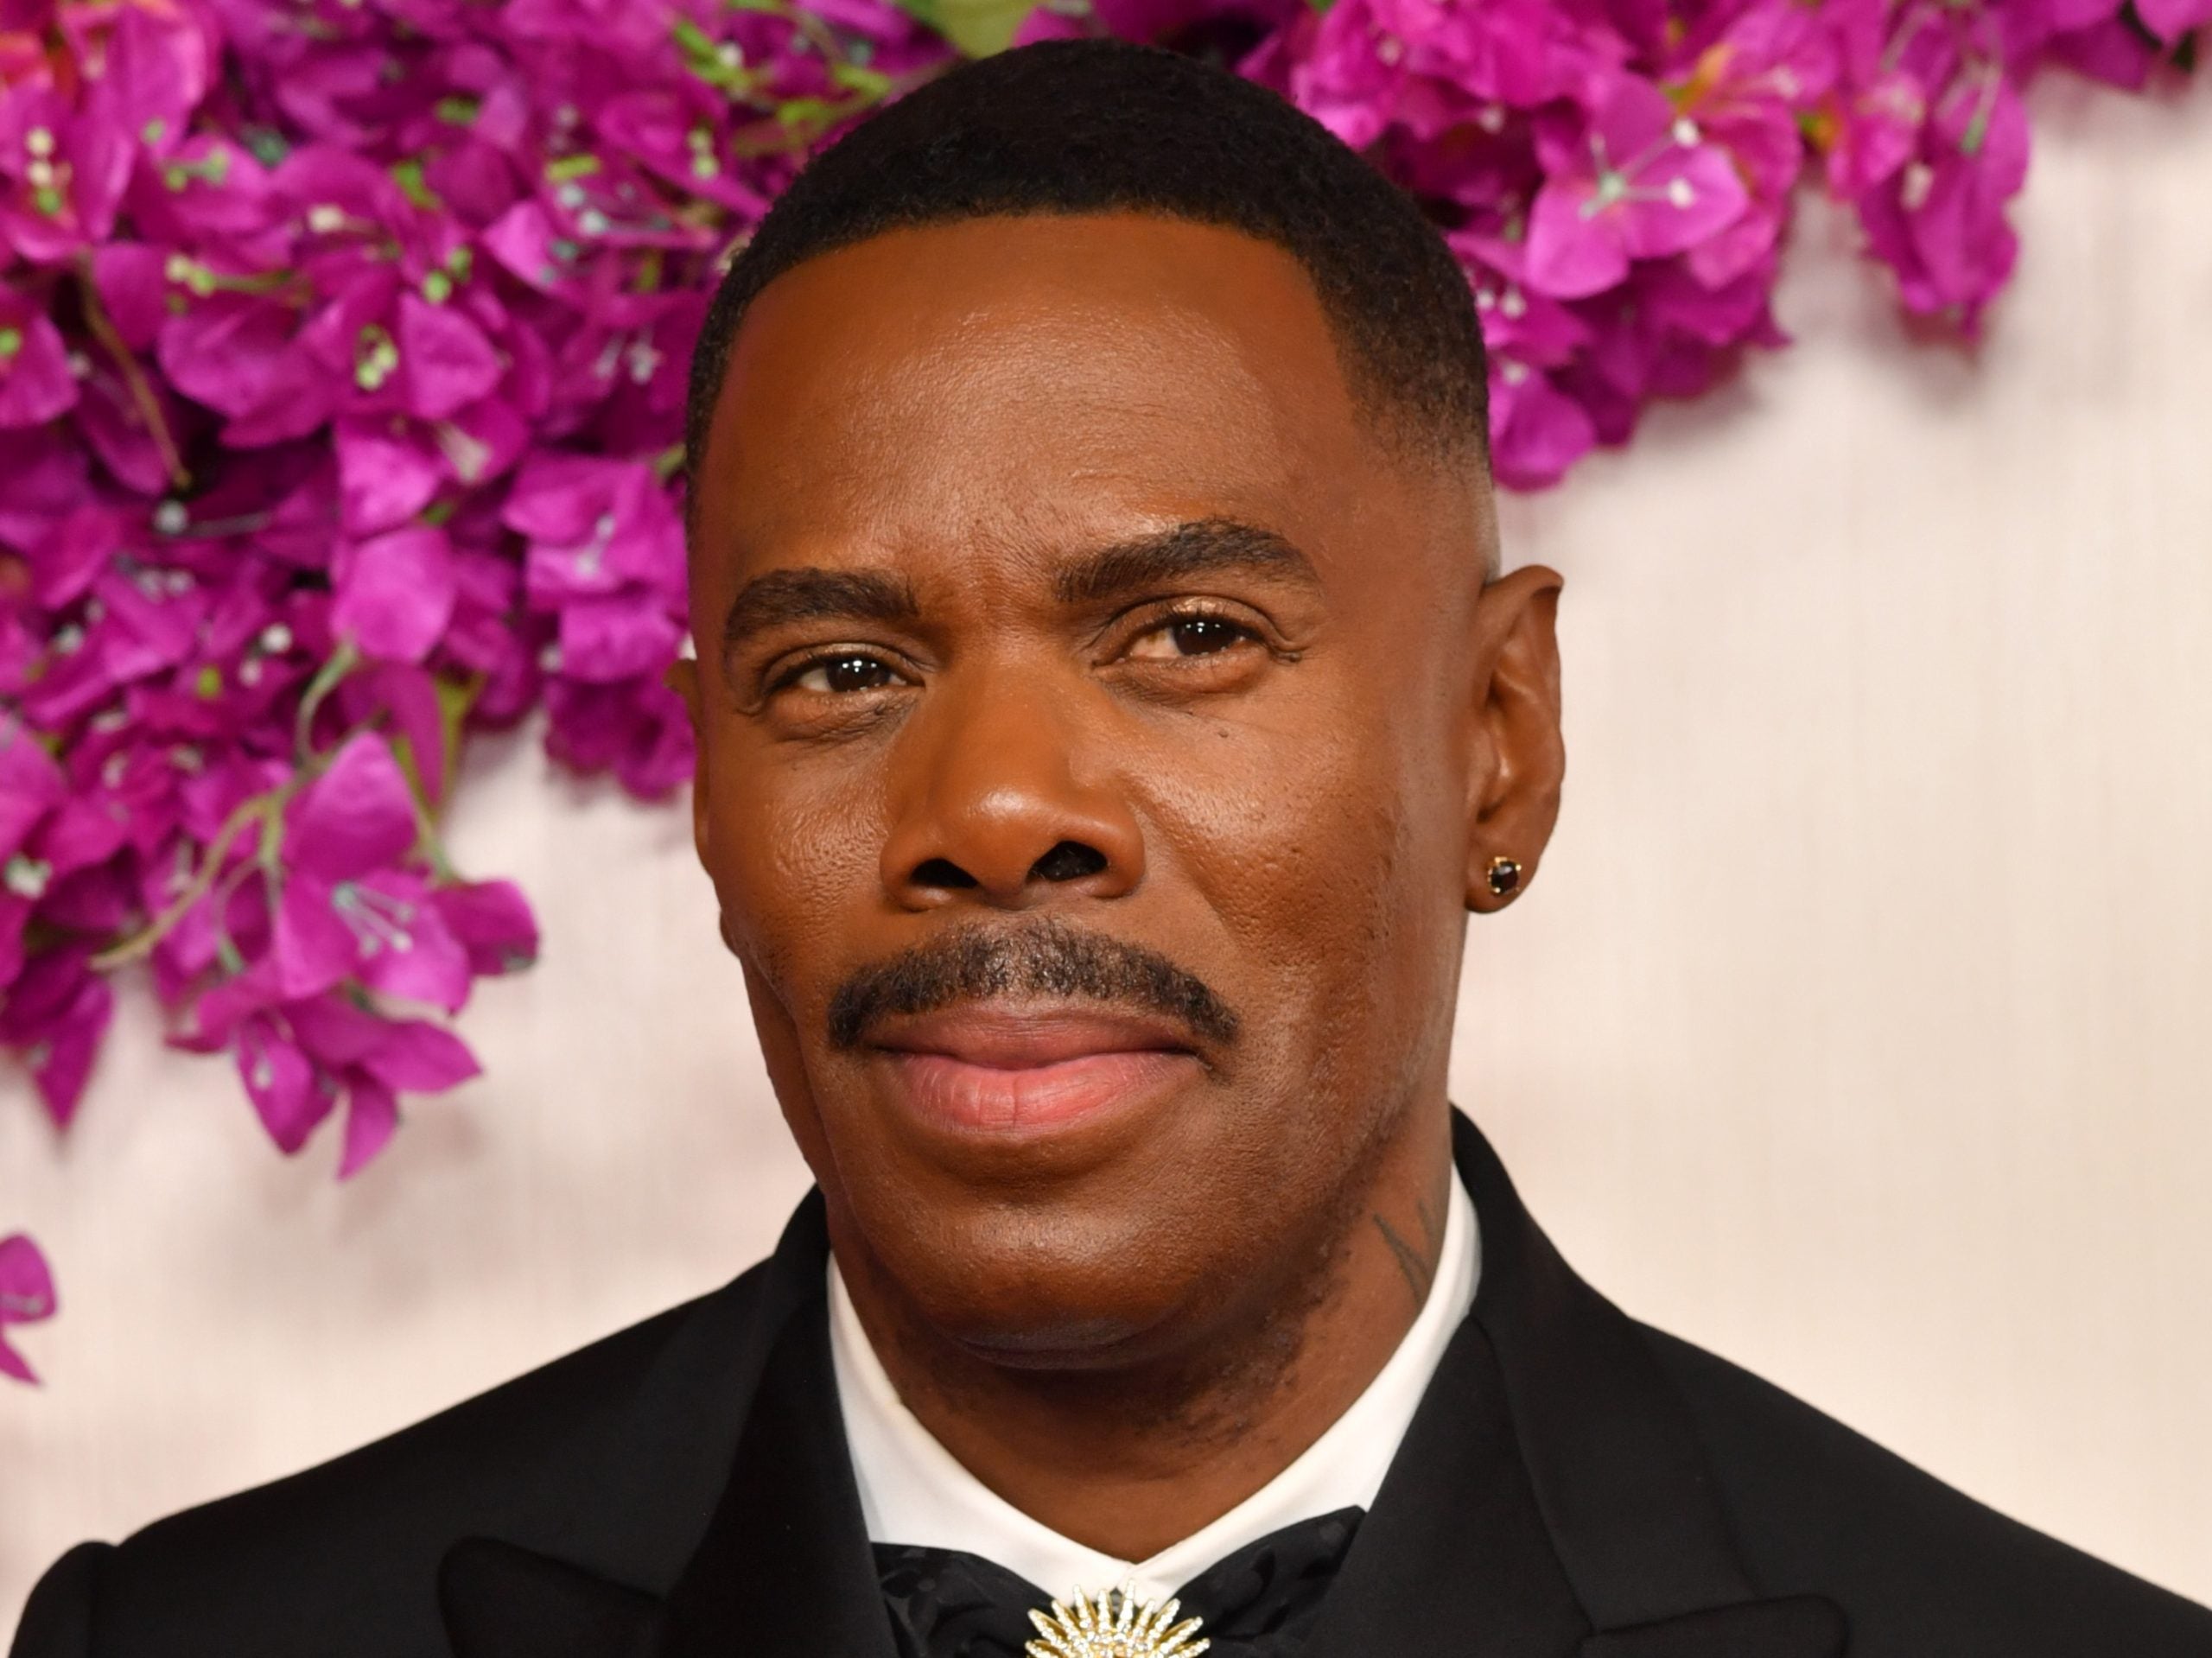 Get Ready With Colman Domingo for the 96th Oscars